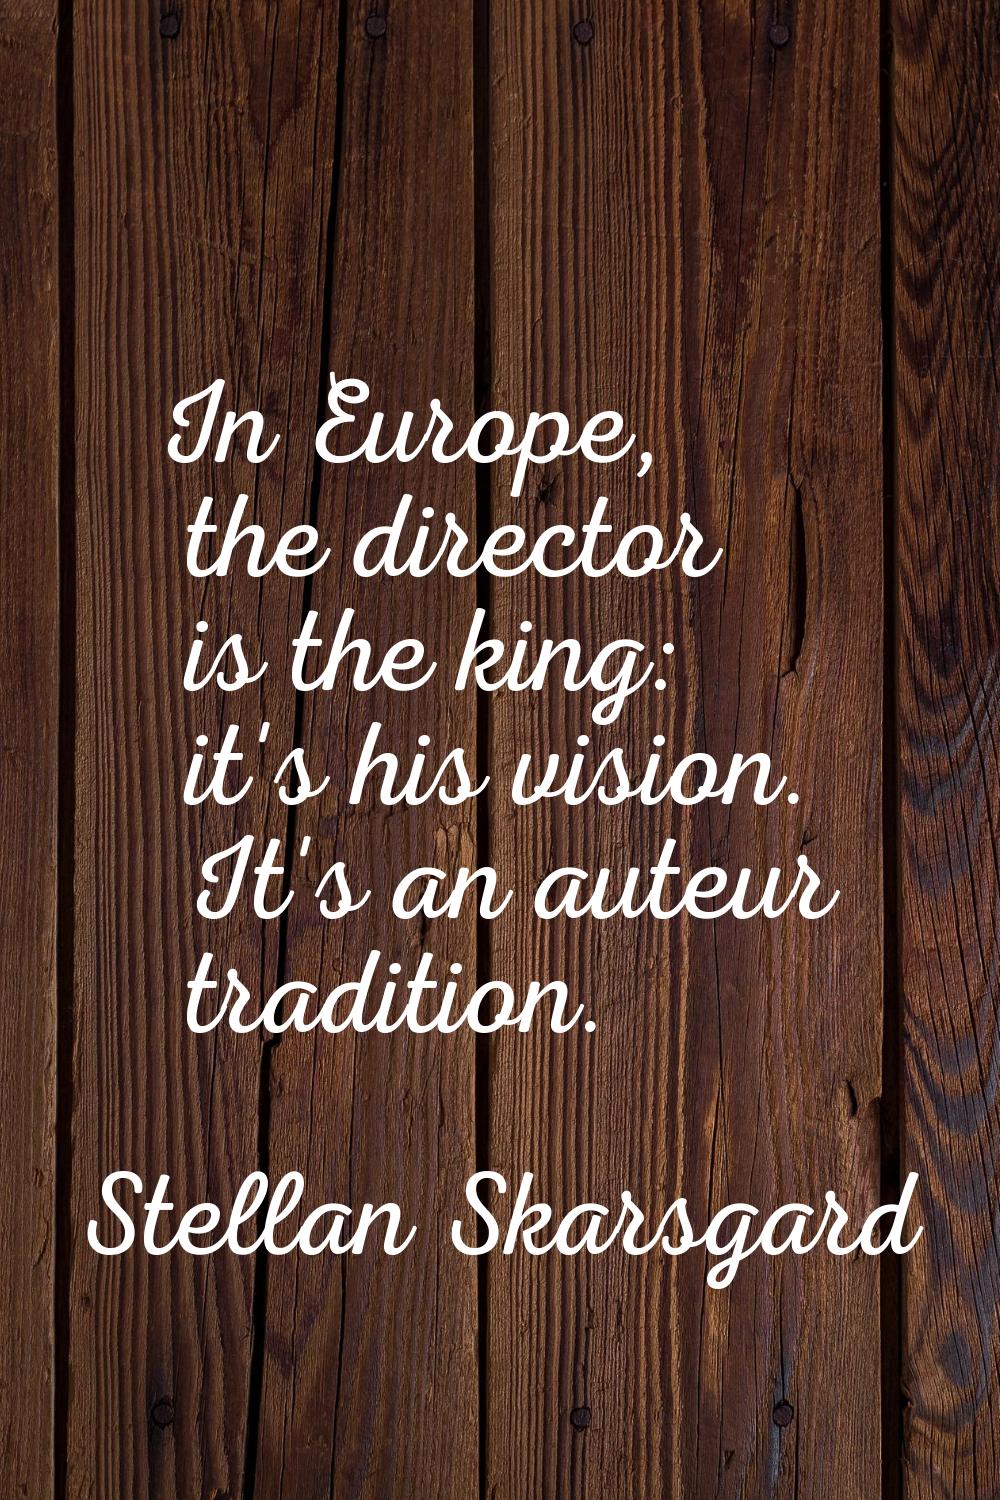 In Europe, the director is the king: it's his vision. It's an auteur tradition.